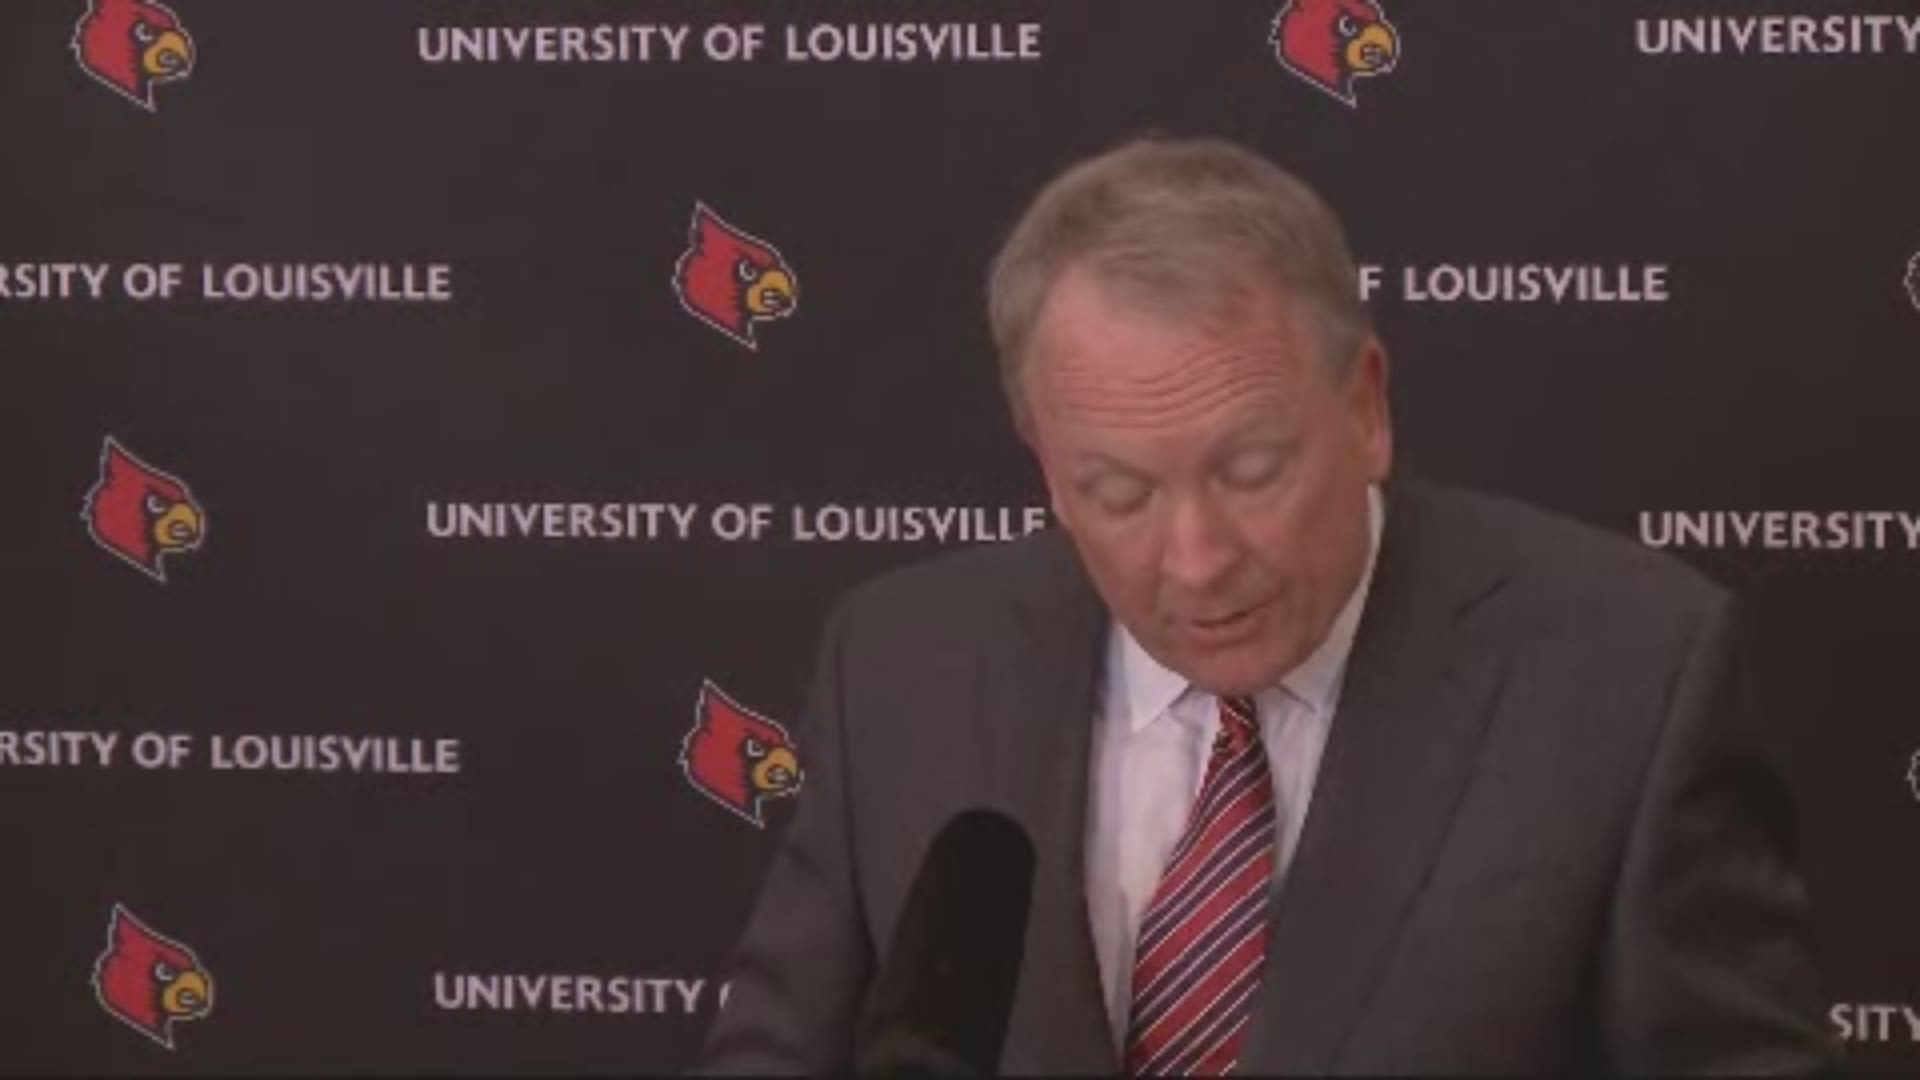 Postel called the NCAA infractions a dark cloud. He also said the NCAA ruling doesn't take away any accomplishments of the basketball team or the joy they brought.